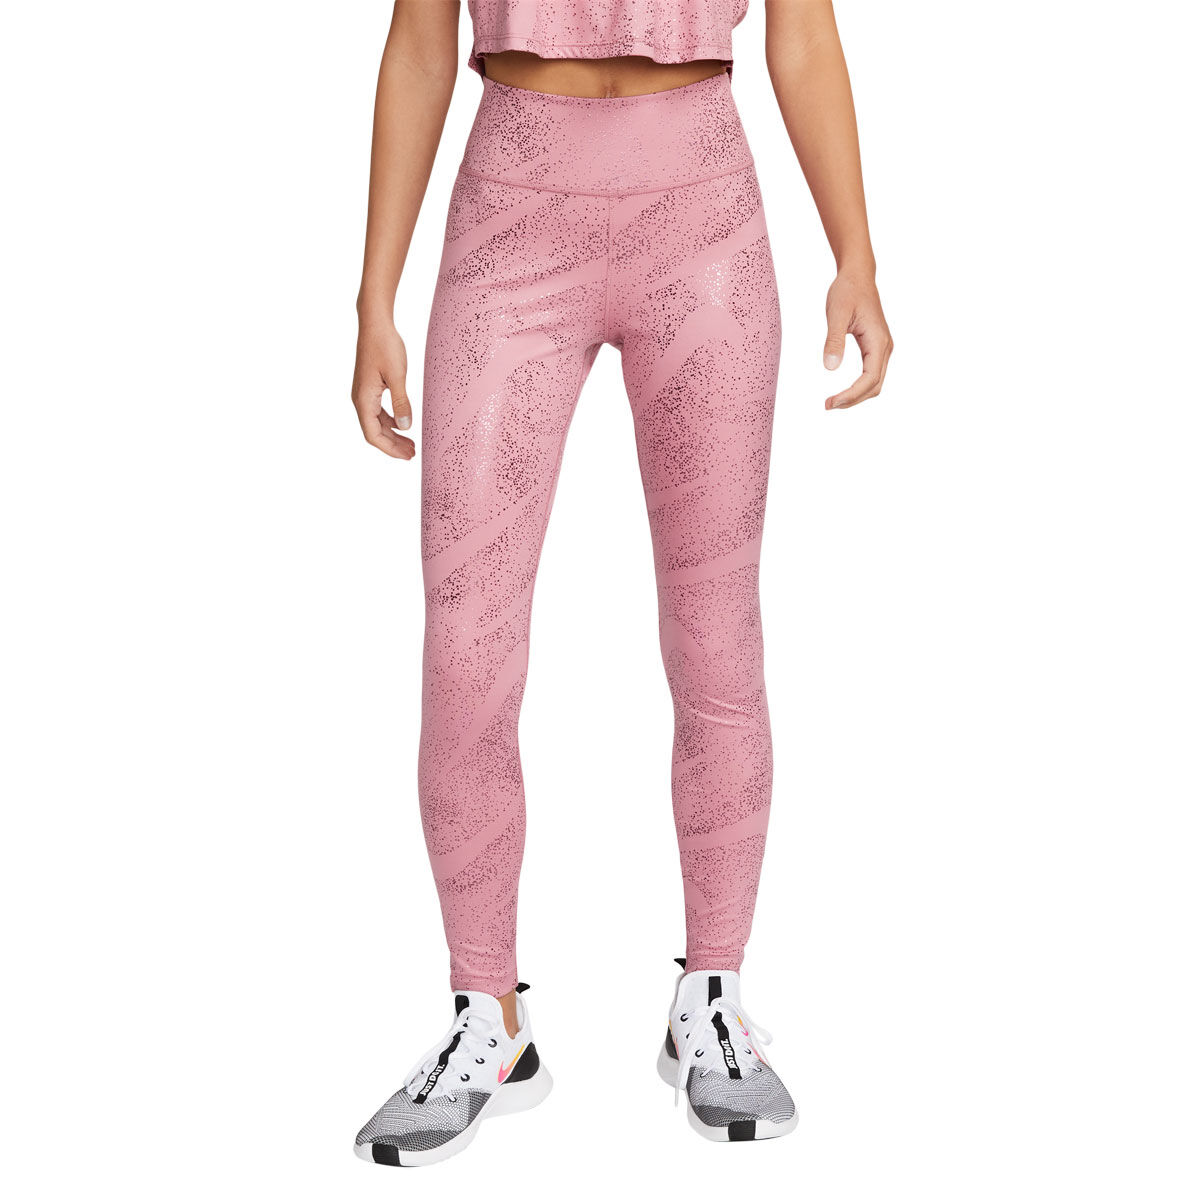 Nike One Womens Mid-Rise Printed Tights Pink M